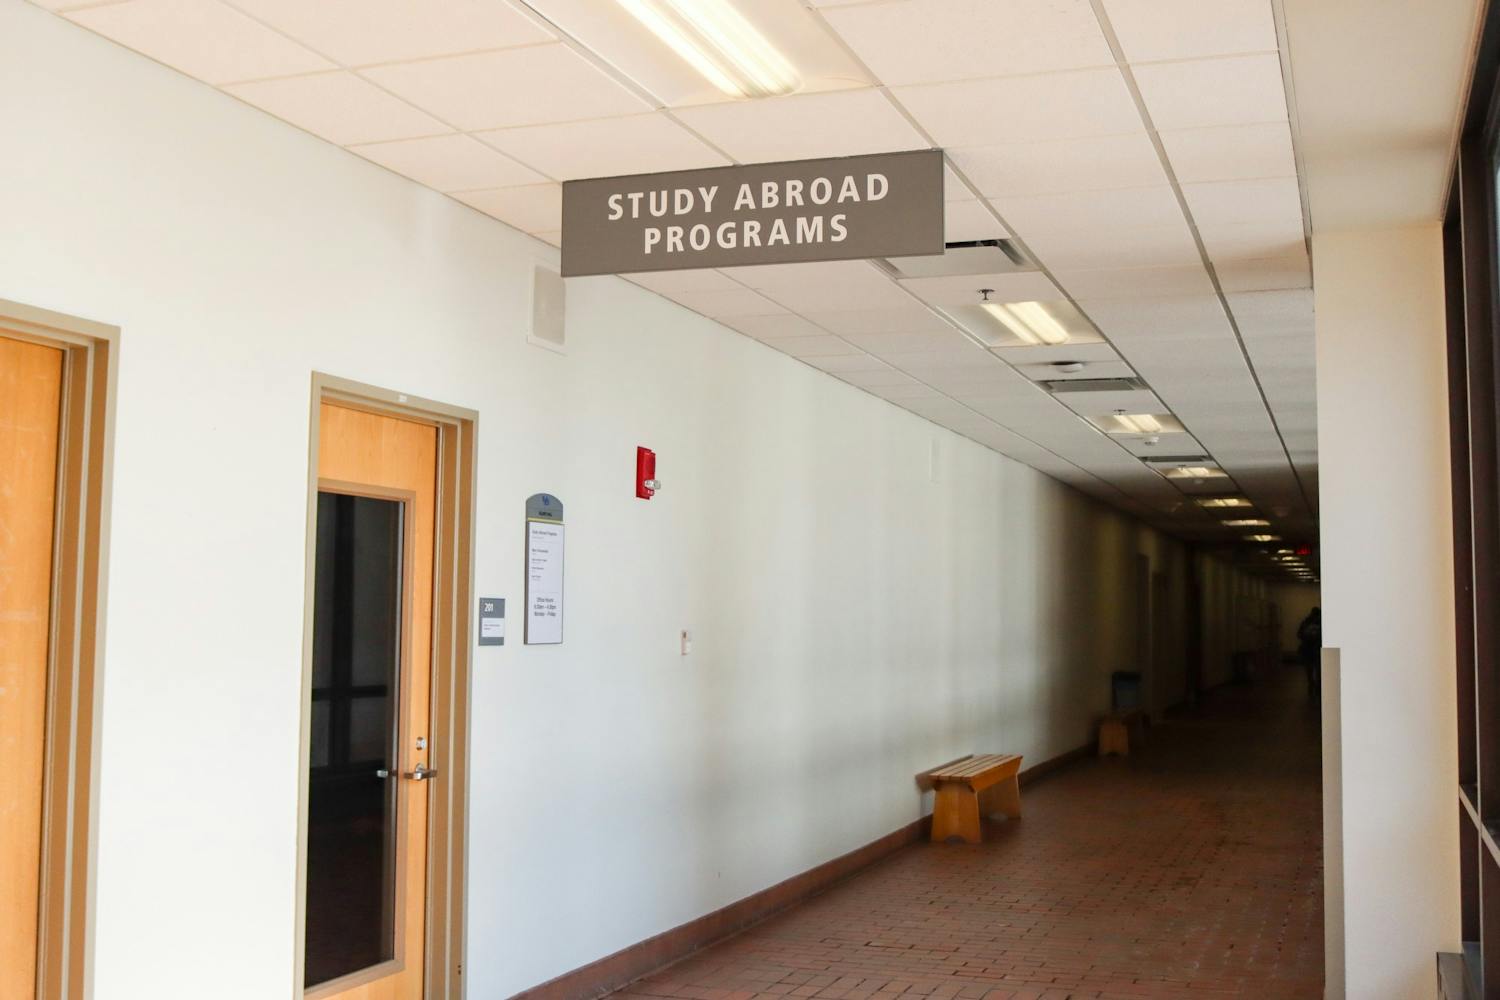 The Study Abroad Office is located on the second floor of Talbert Hall.